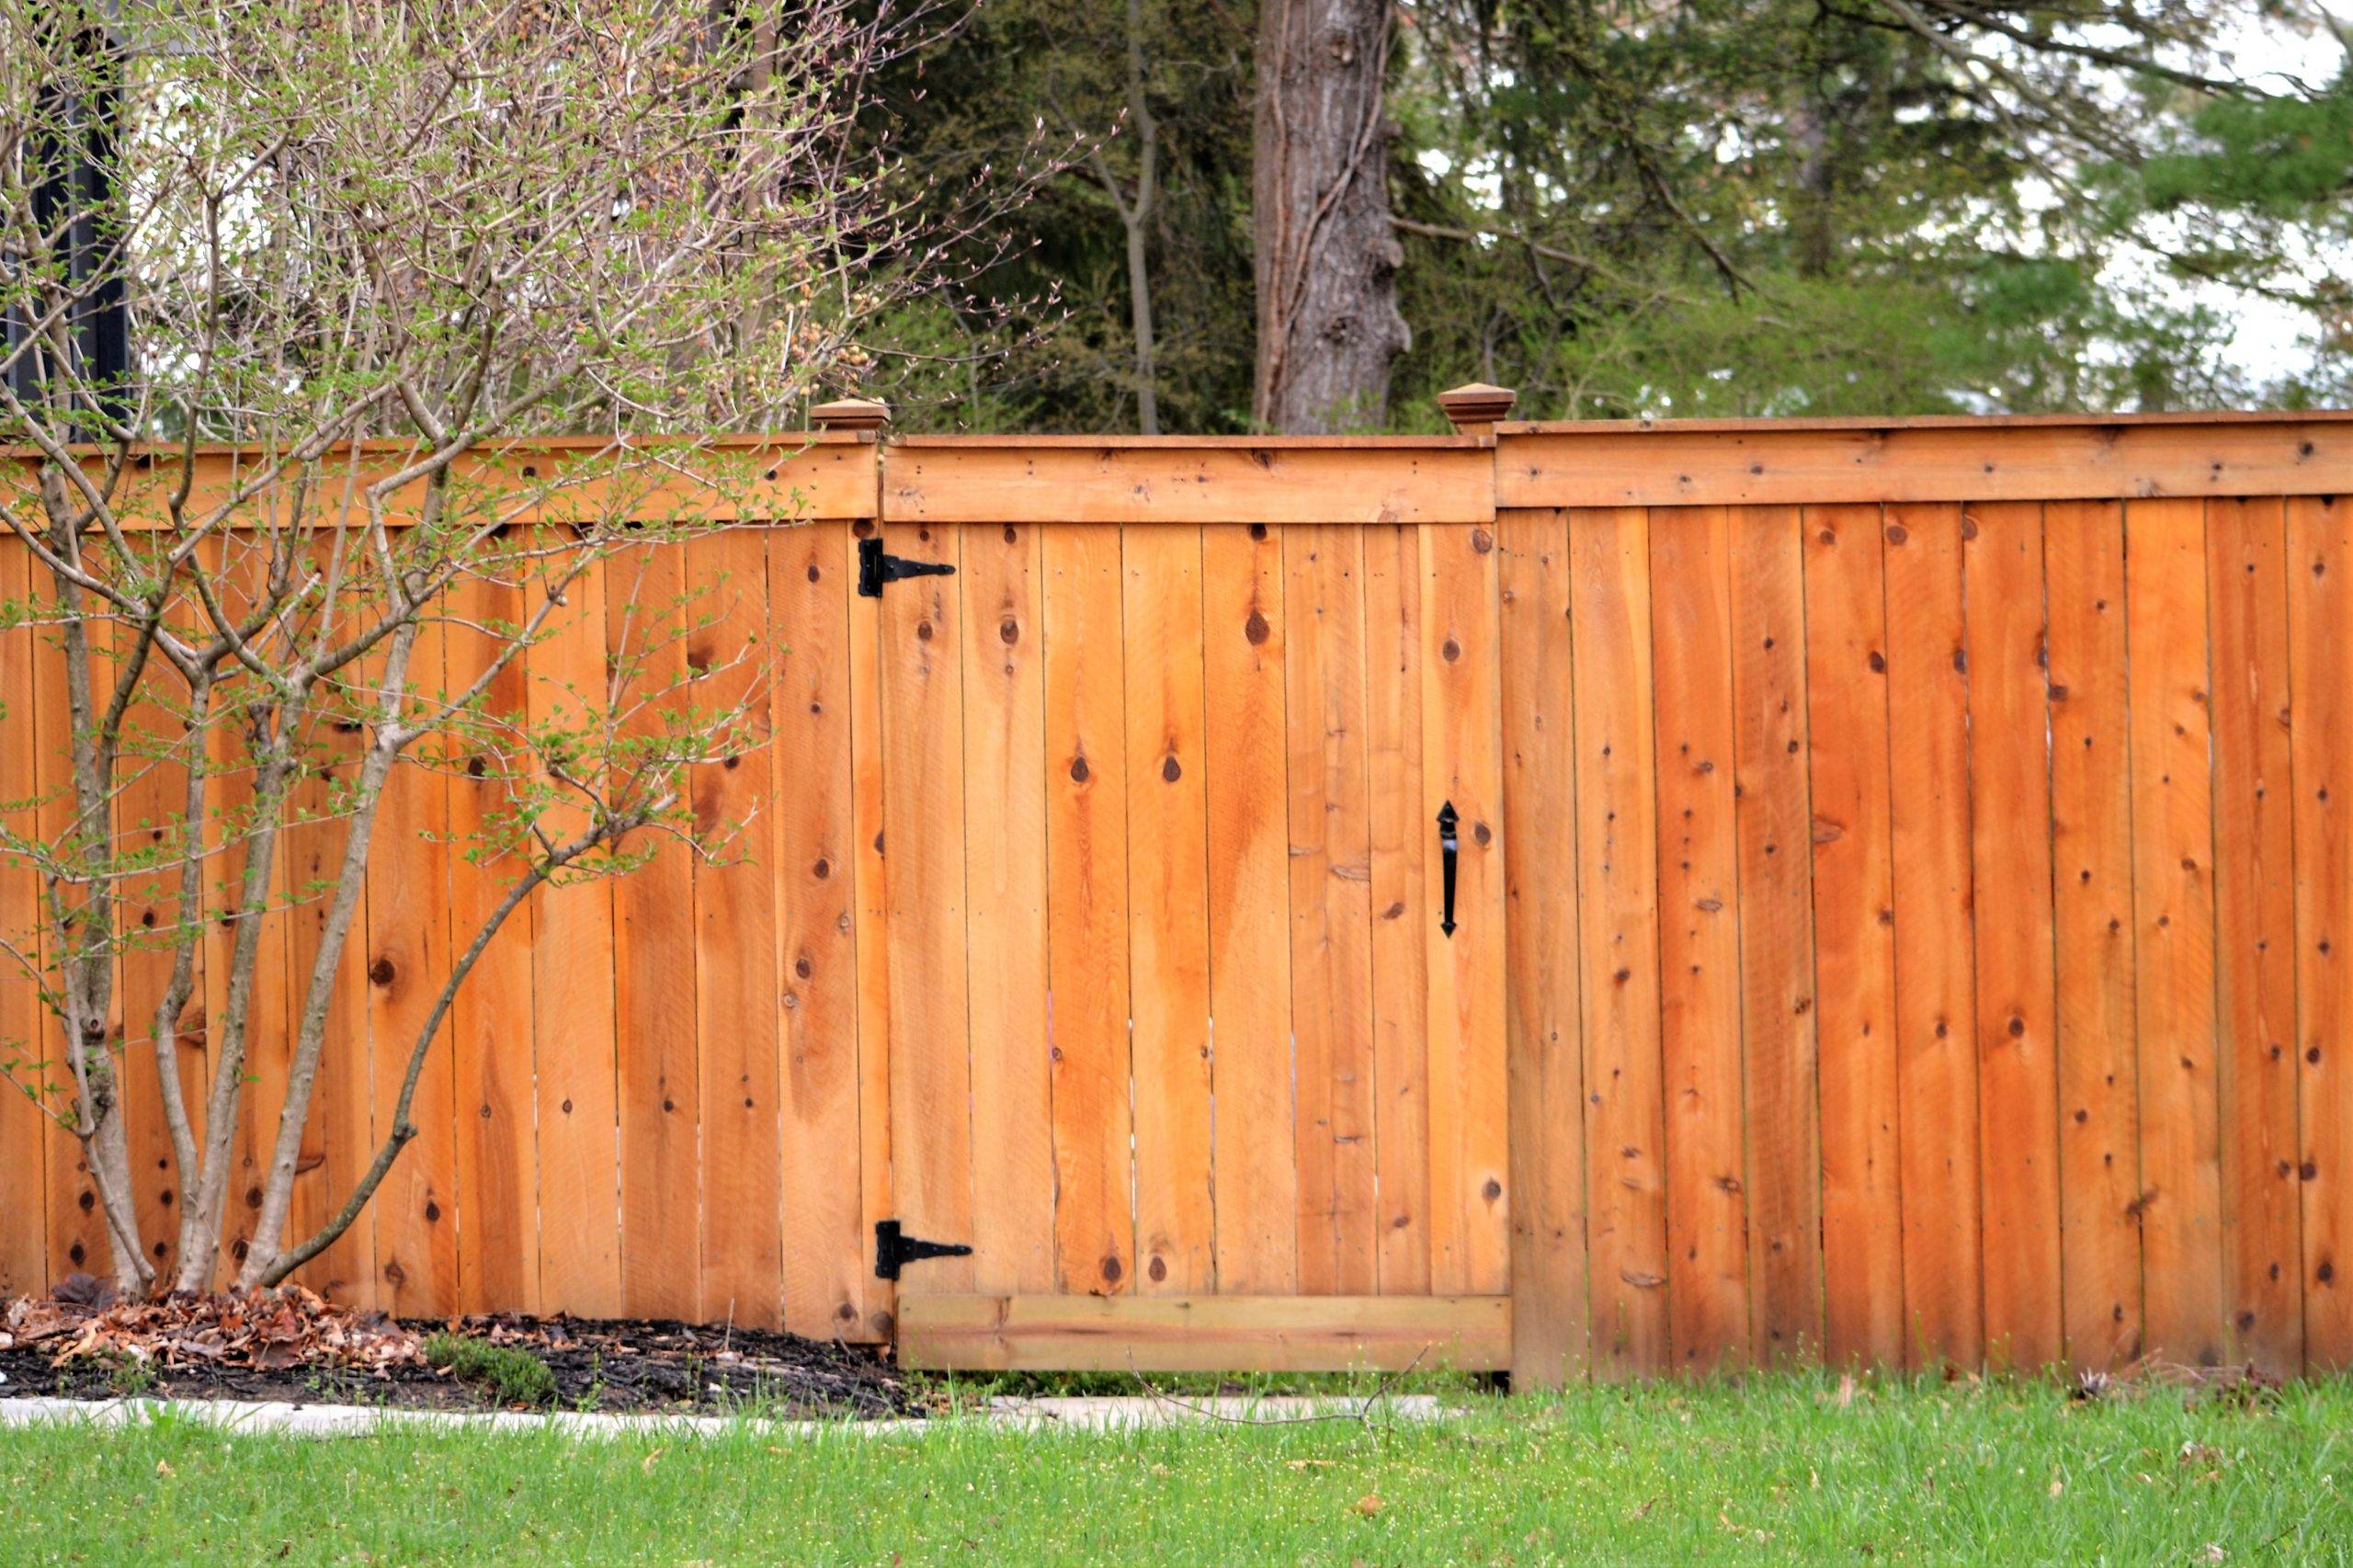 dark wood stained fence with gate hinges and green grass